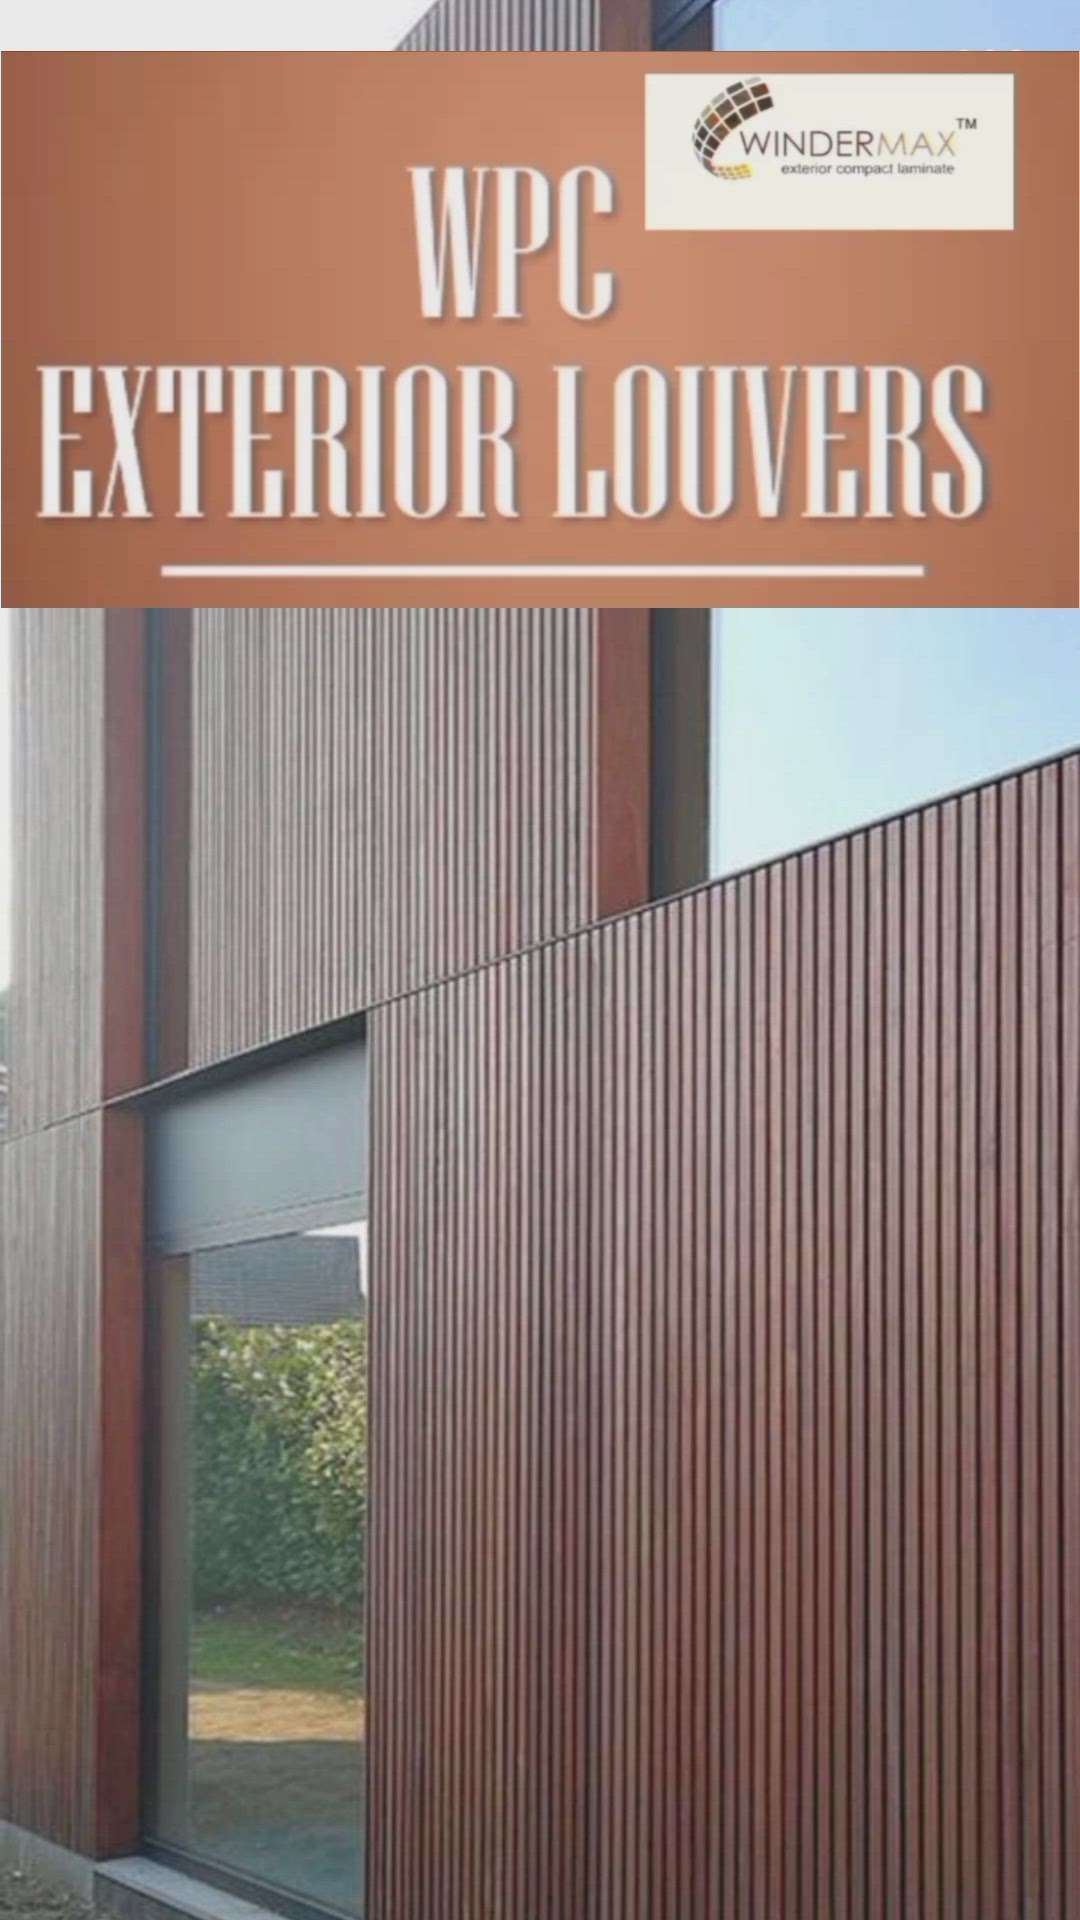 Windermax India presenting you WPC Louvers for Modern Exterior Elevation
.
.
#aluminiumlouvers #aluminium #Exterior #wpcinterior #louvers #elevation #Interiordesigner #Frontelevation #modernexterior  #Home #Decor #louvers #interior #aluminiumfin #fins #wpc #wpcpanel #wpclouvers #homedecor  #elevationdesign #architect #interior #exteriordesign #architecturedesign #fin #interiordesigner #elevations #drawing #frontelevation #architecturelovers #home #aluminiumfins
.
.
For more details our all products please visit websites
www.windermaxindia.com
www.indianmake.co.in 
Info@windermaxindia.com
or call us on 
8882291670 9810980278

Regards
Windermax India